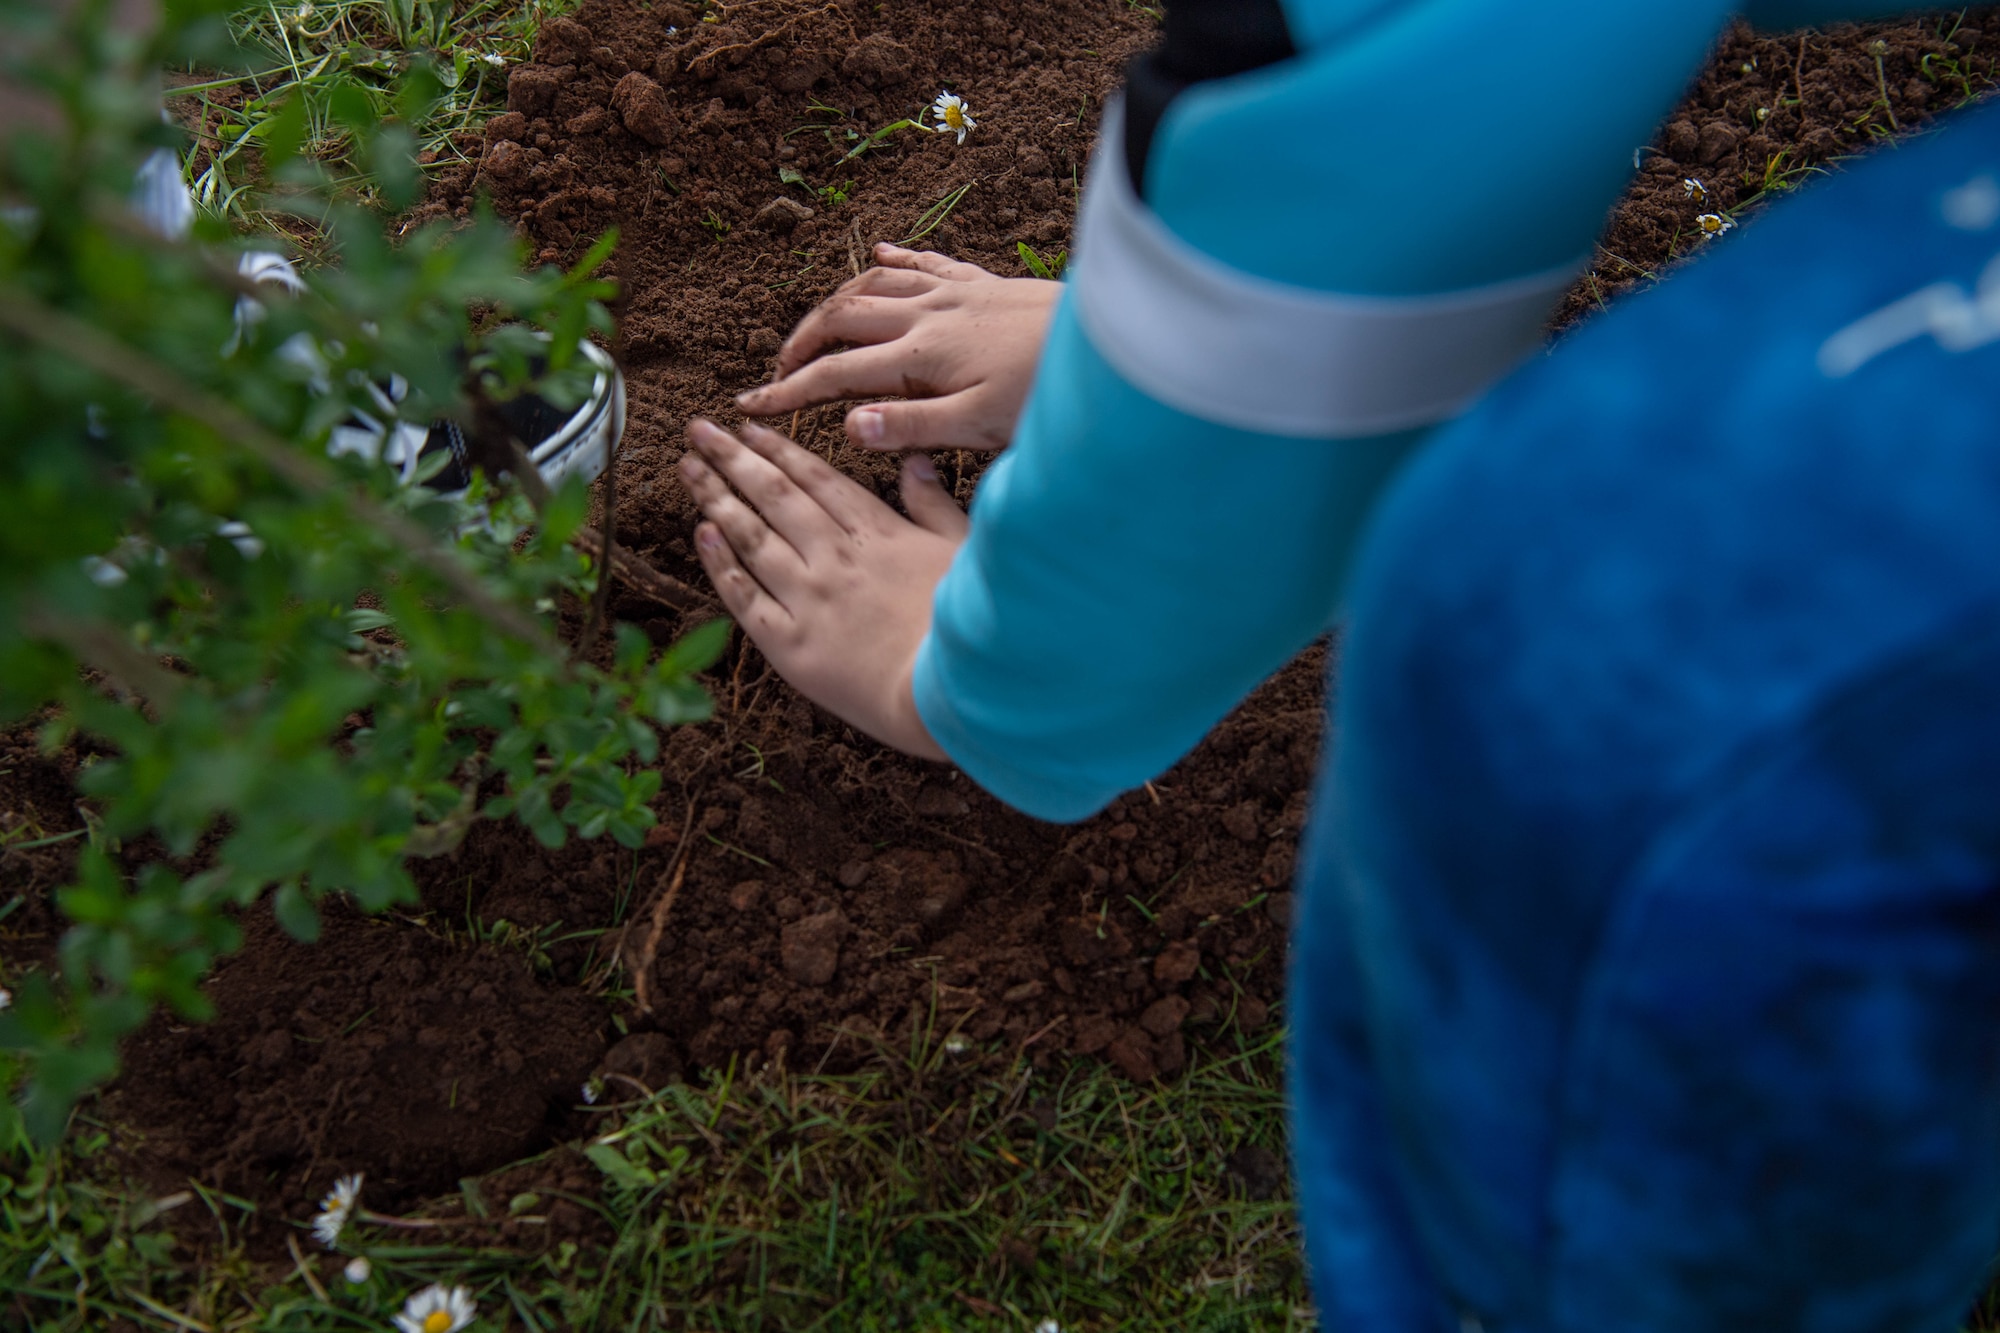 Students from Kaiserslautern Elementary School using their hands to press down on soil during a tree planting event, at Vogelweh Military Complex, Germany, April 26, 2022. The students encouraged each other to press gently to ensure the plant is not harmed. (U.S. Air Force photo by Airman 1st Class Jordan Lazaro)